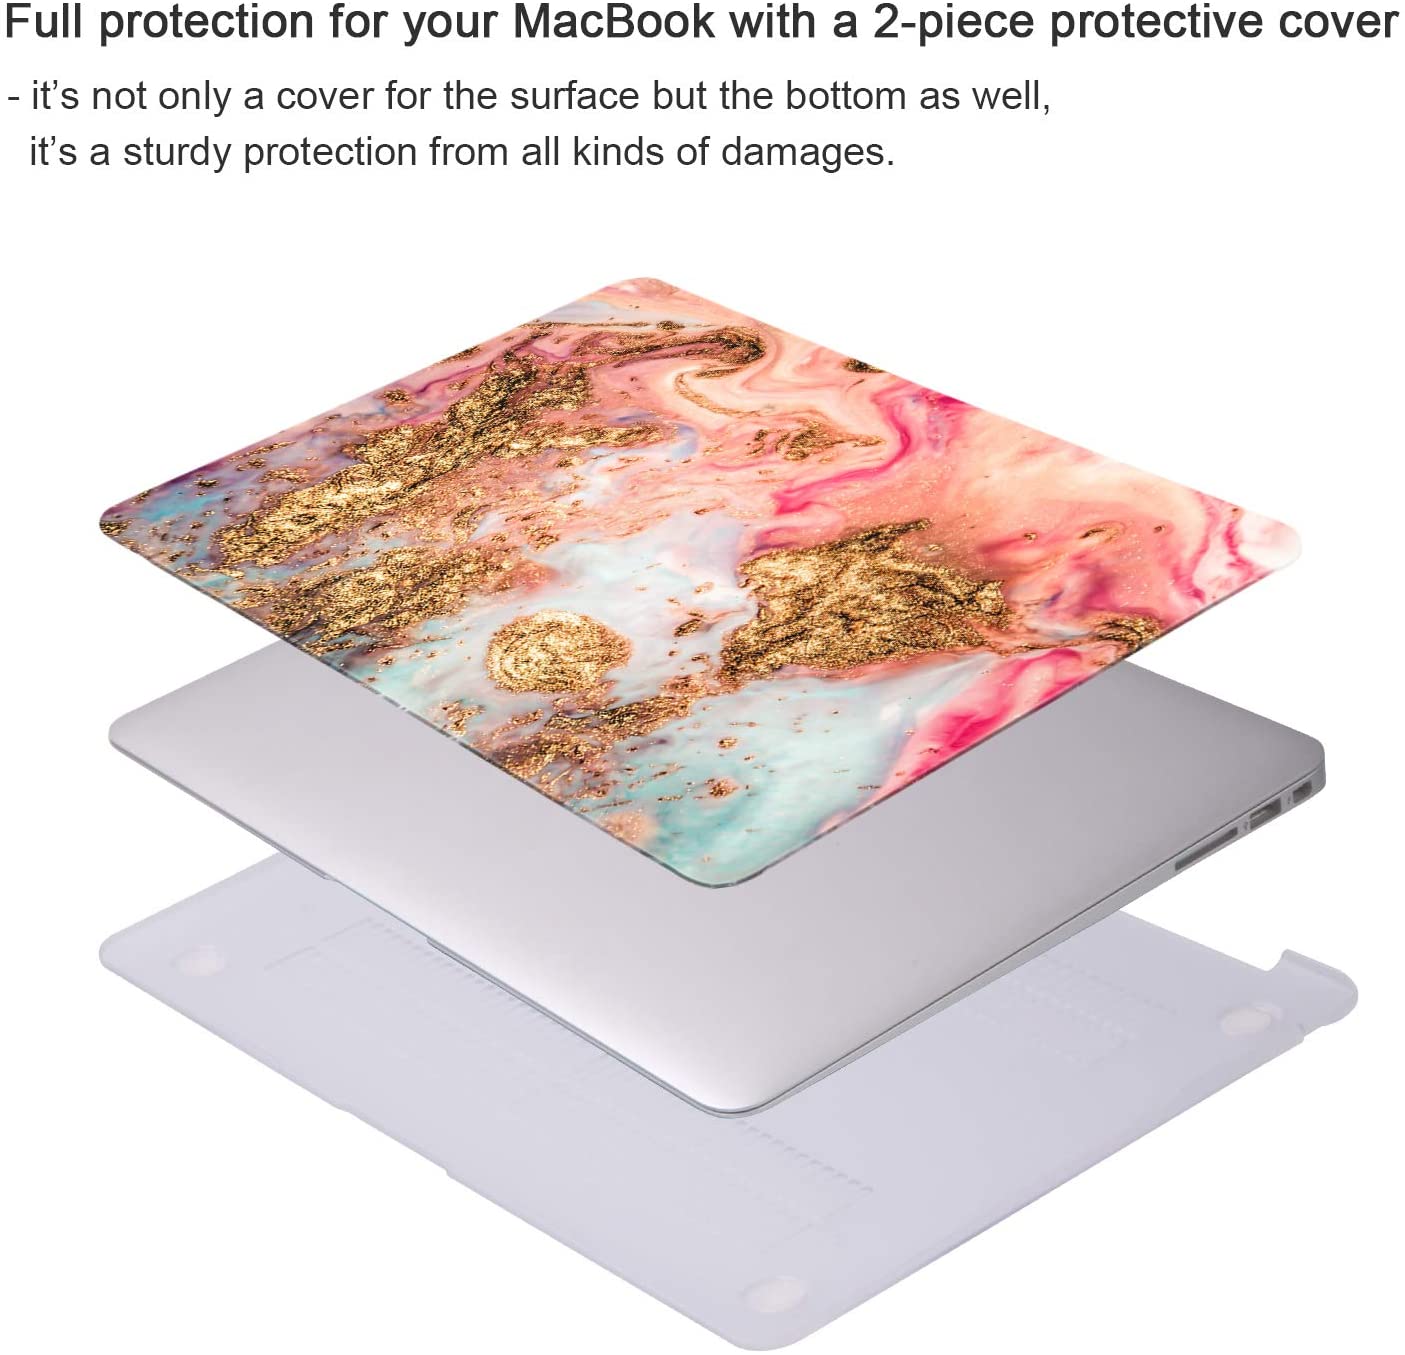 Glitter Marble - MacBook Air 13 inch Case 2018 - 2020 Release. Plastic Pattern Hard Shell keyboard & screen protector. Compatible with MacBook Air 13. - e4cents